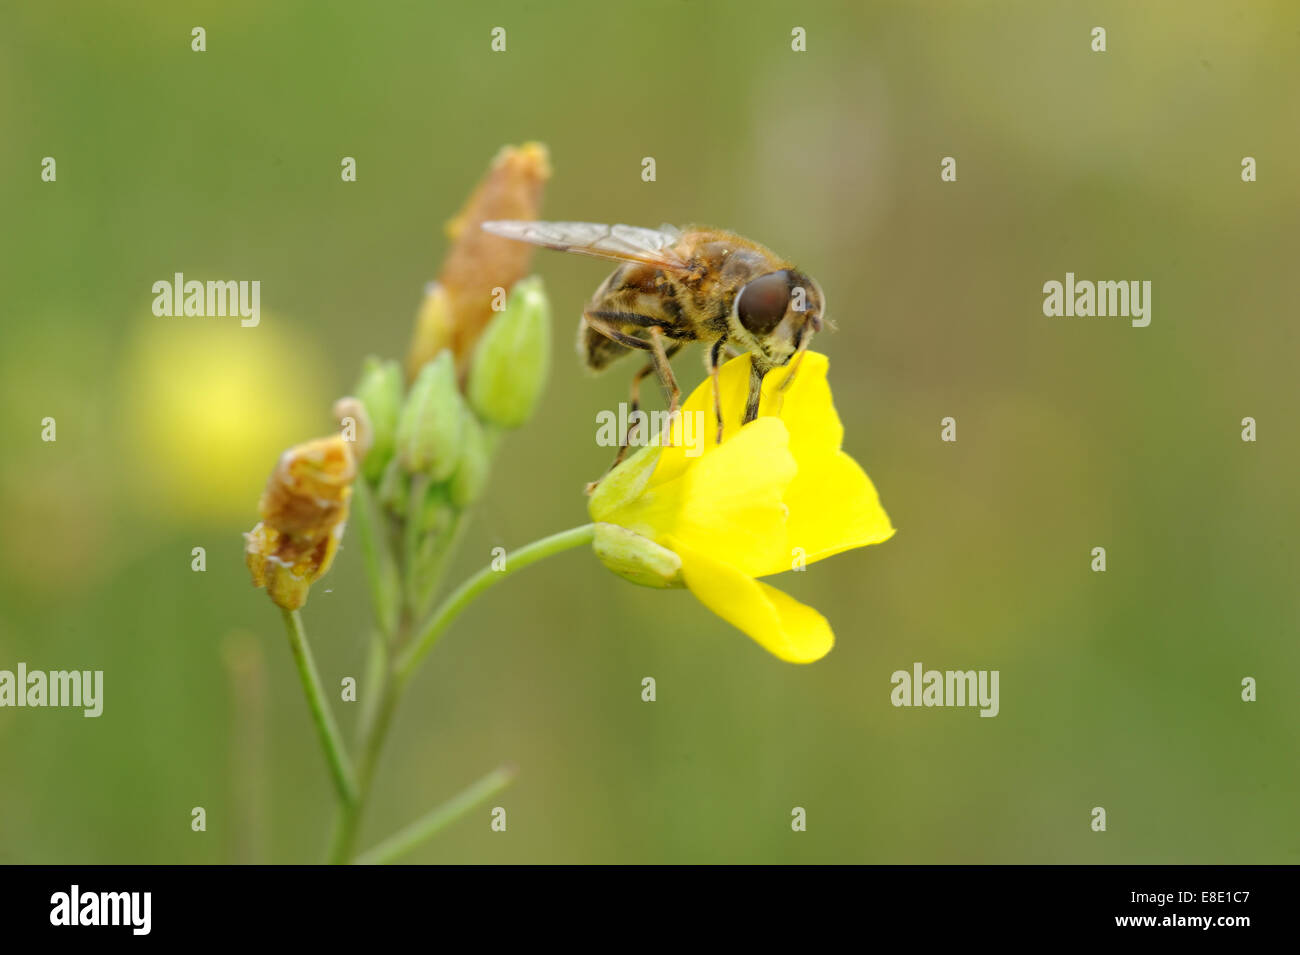 Wild Rocket (Rucola Selvatica) flowers and insect. Stock Photo